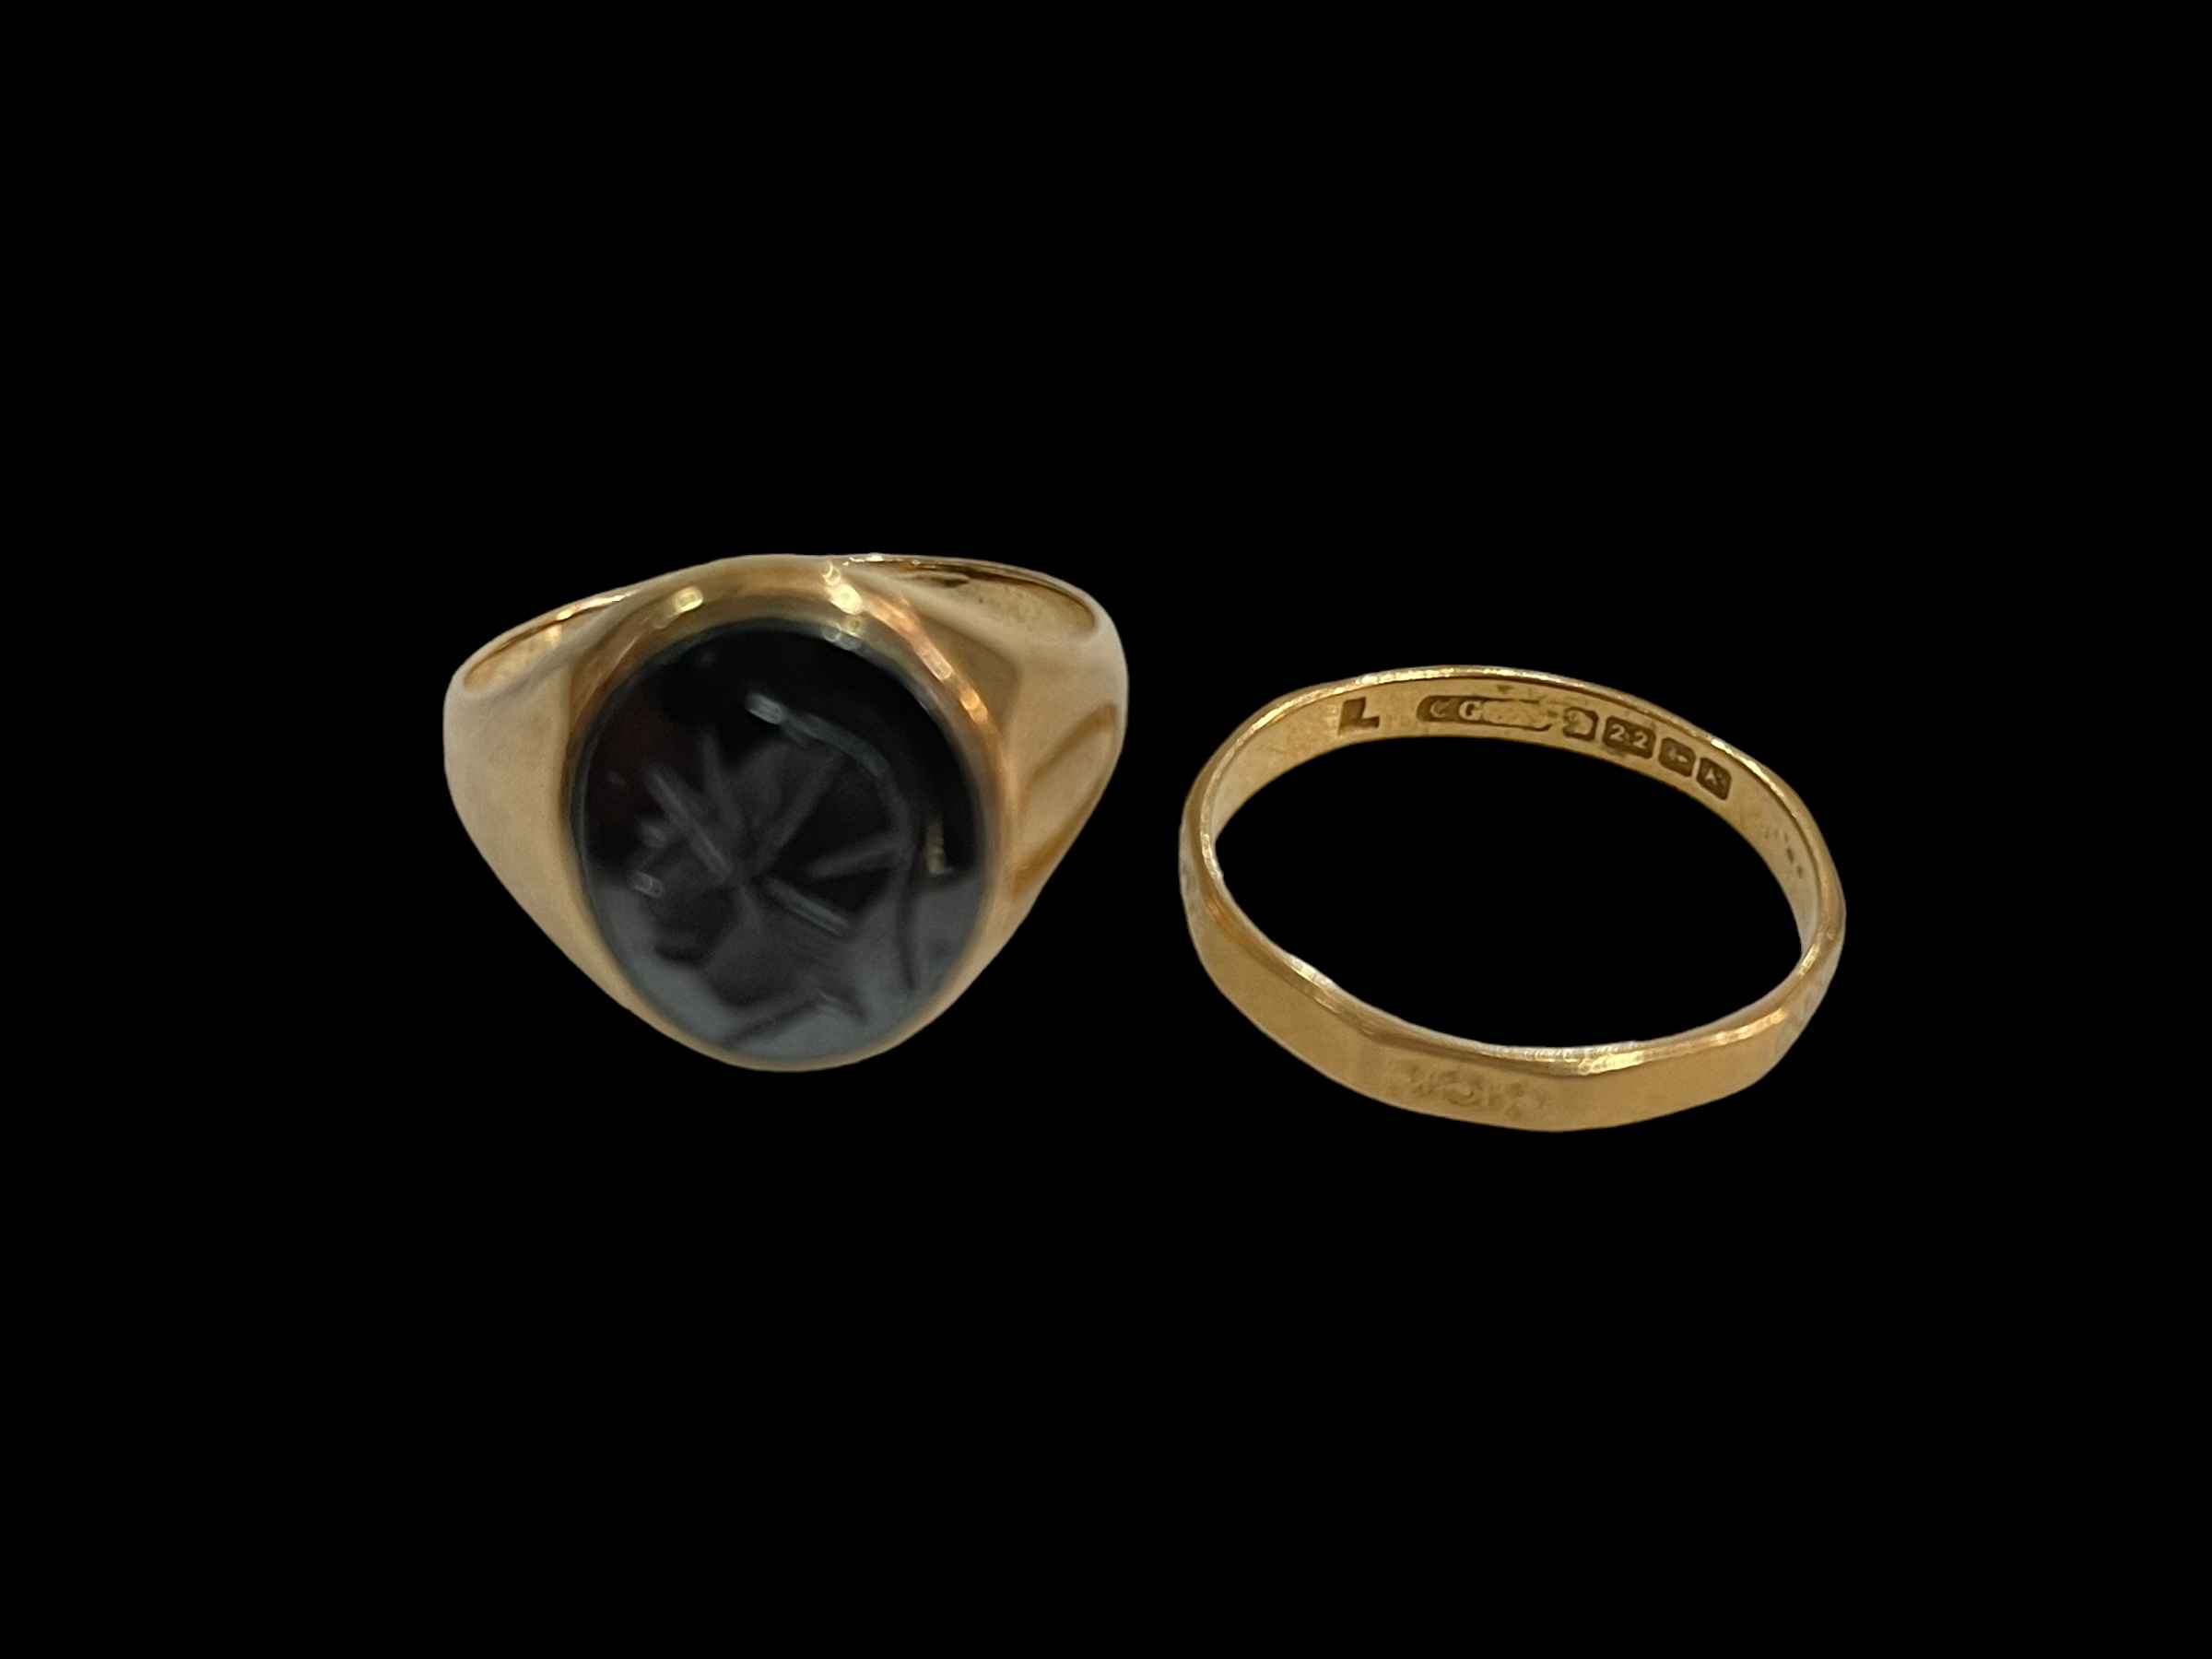 9 carat gold oval carved black stone signet ring, size R and 22 carat gold wedding band, size R.